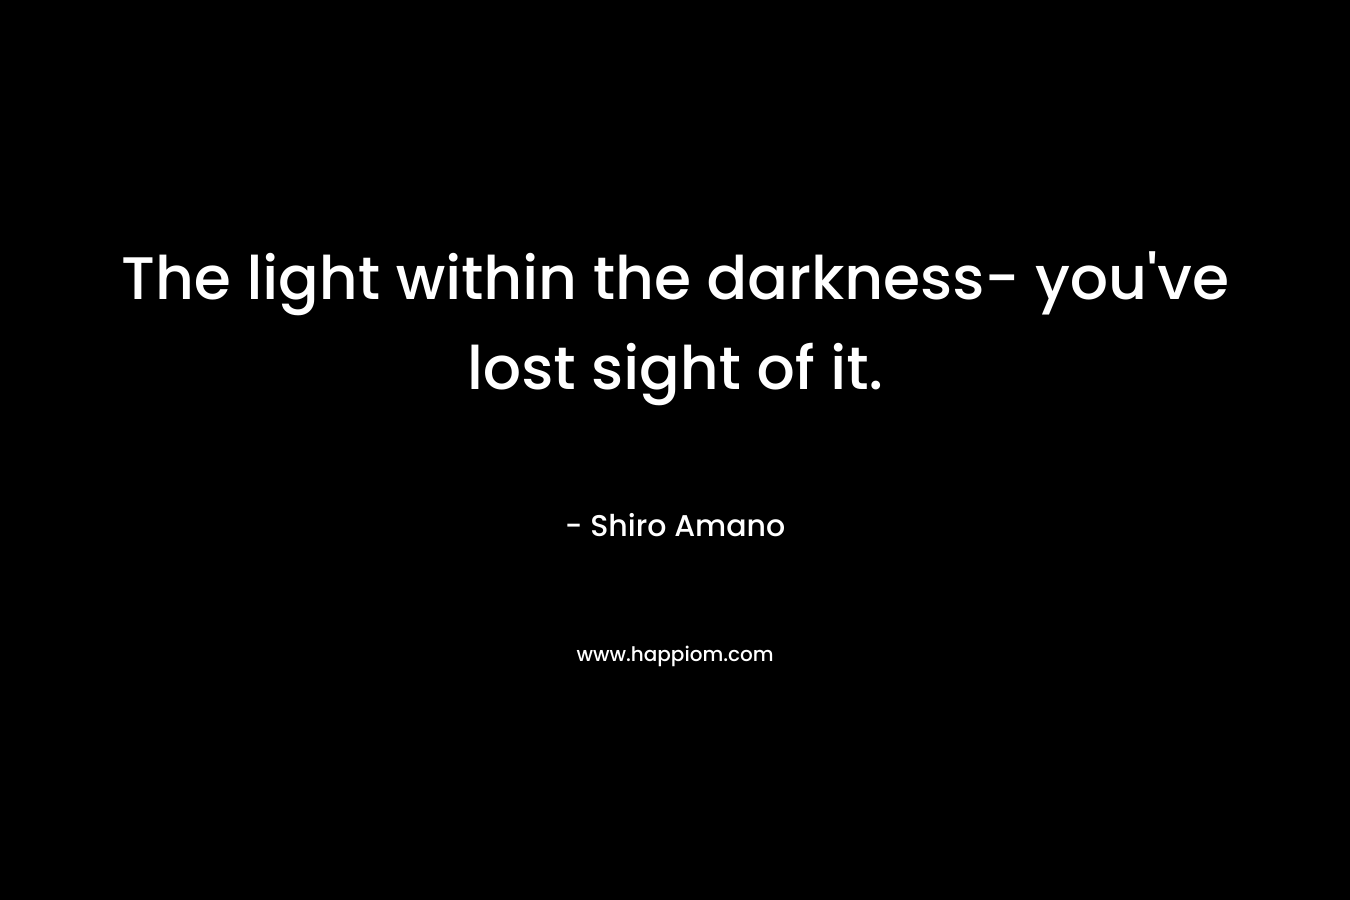 The light within the darkness- you've lost sight of it.